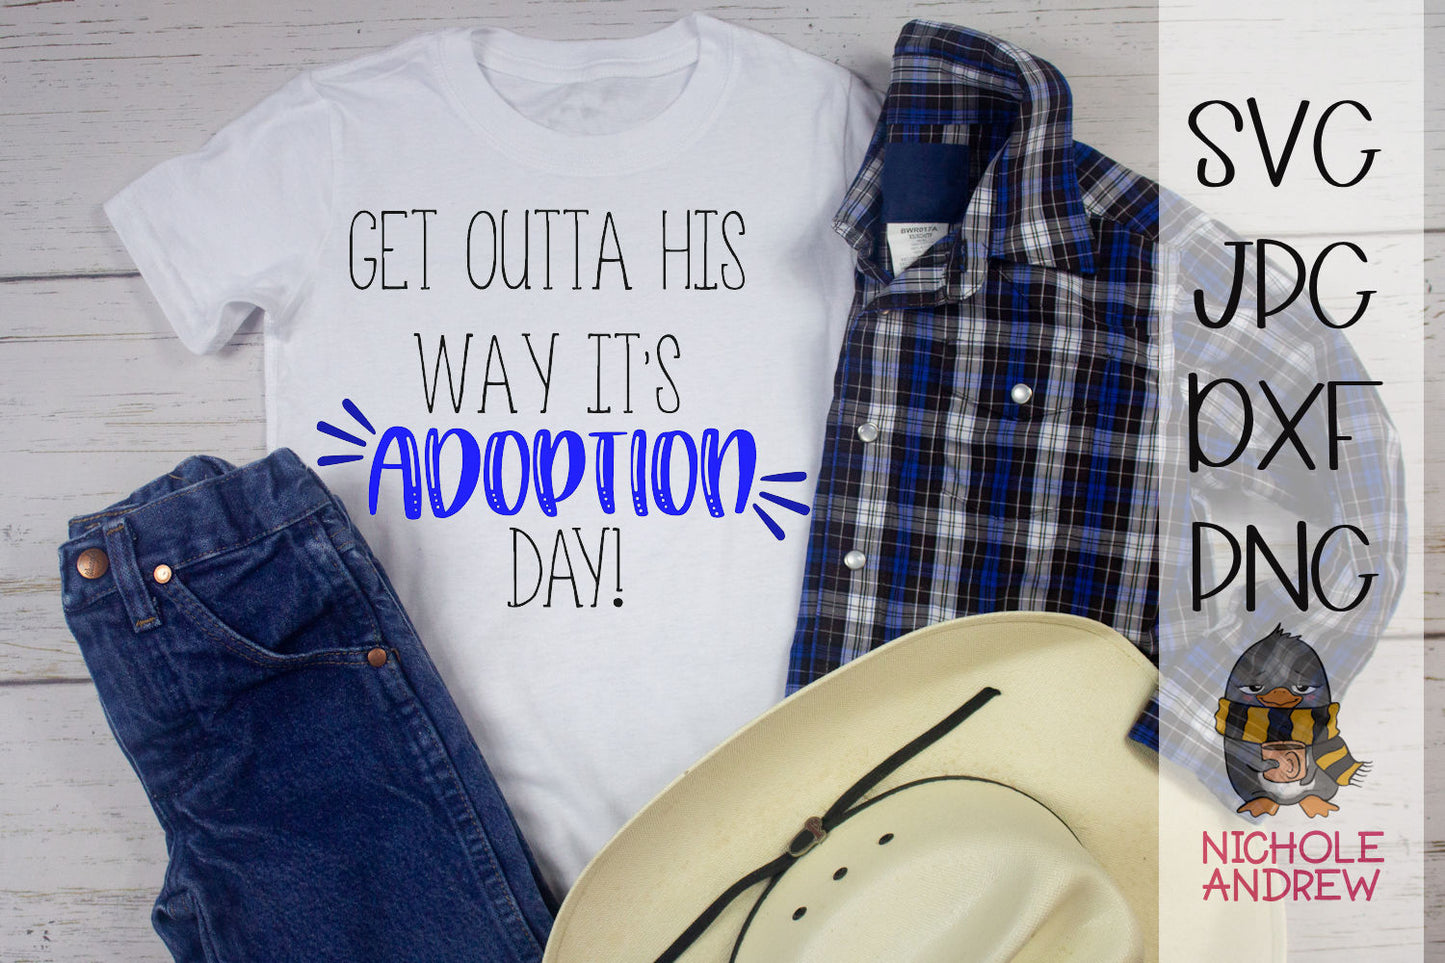 Get Outta His Way It's Adoption Day - SVG Cut File